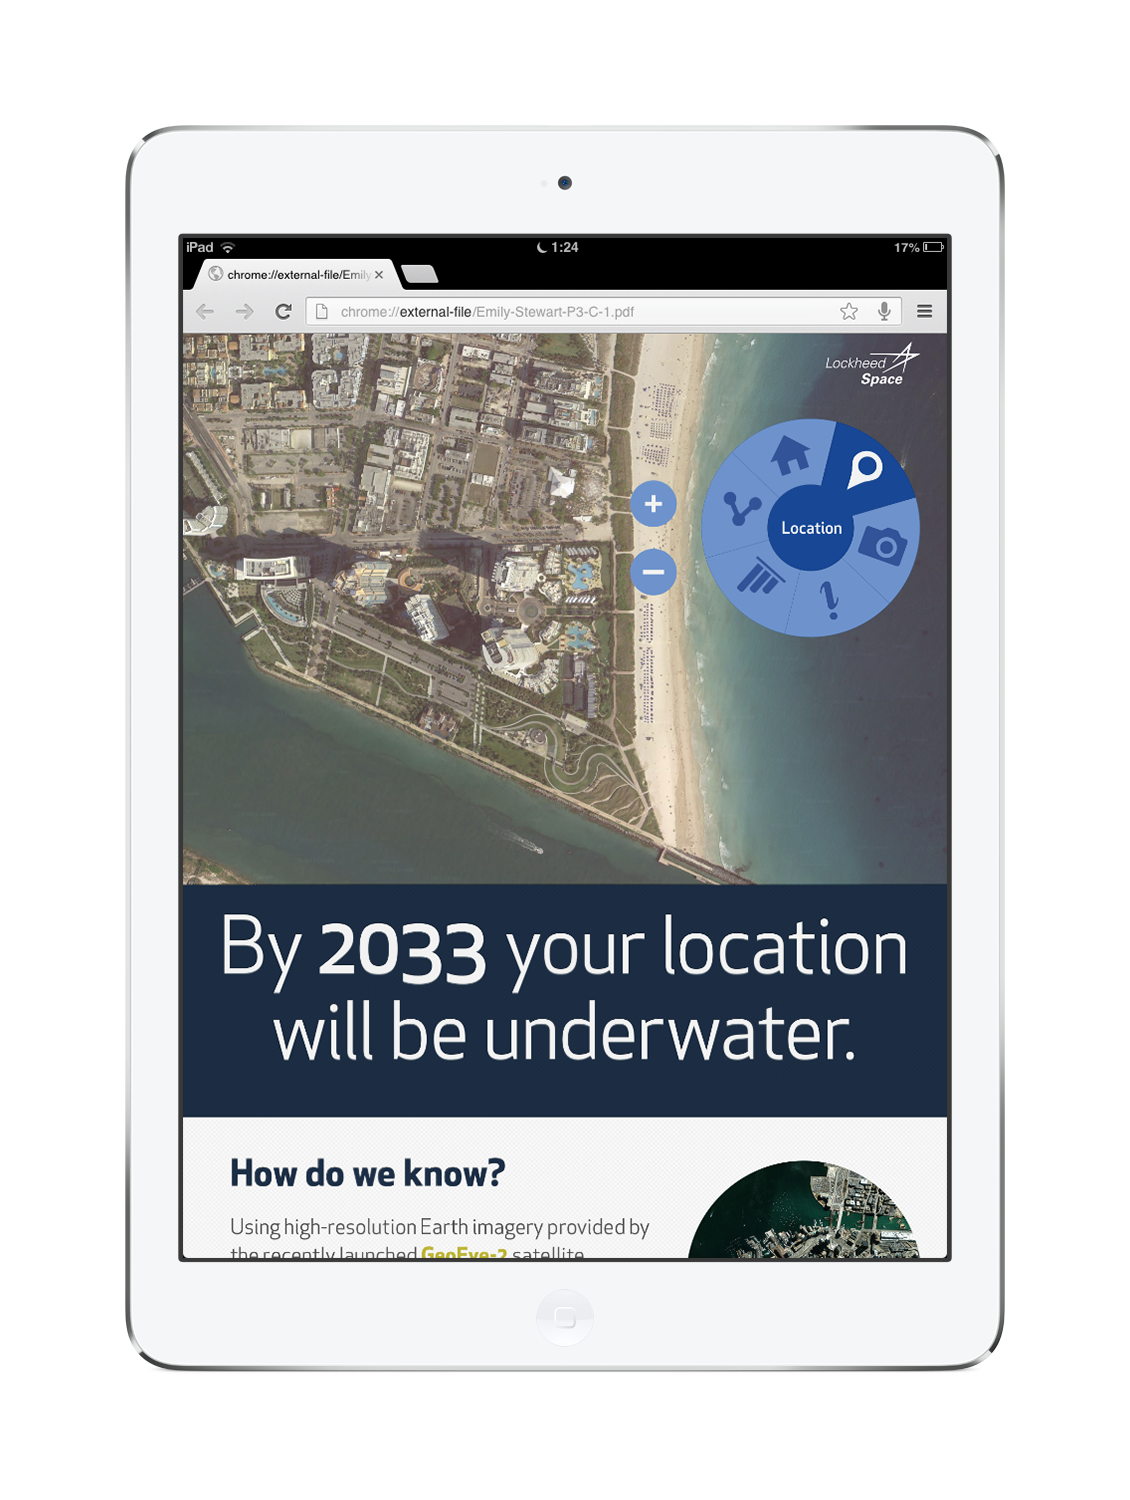 iPad Retina displaying subpage of the campaign website. It states By 2033 your location will be underwater and shows a map of the presumed zip code that the user entered. Below is fictional copy about why that will happen.